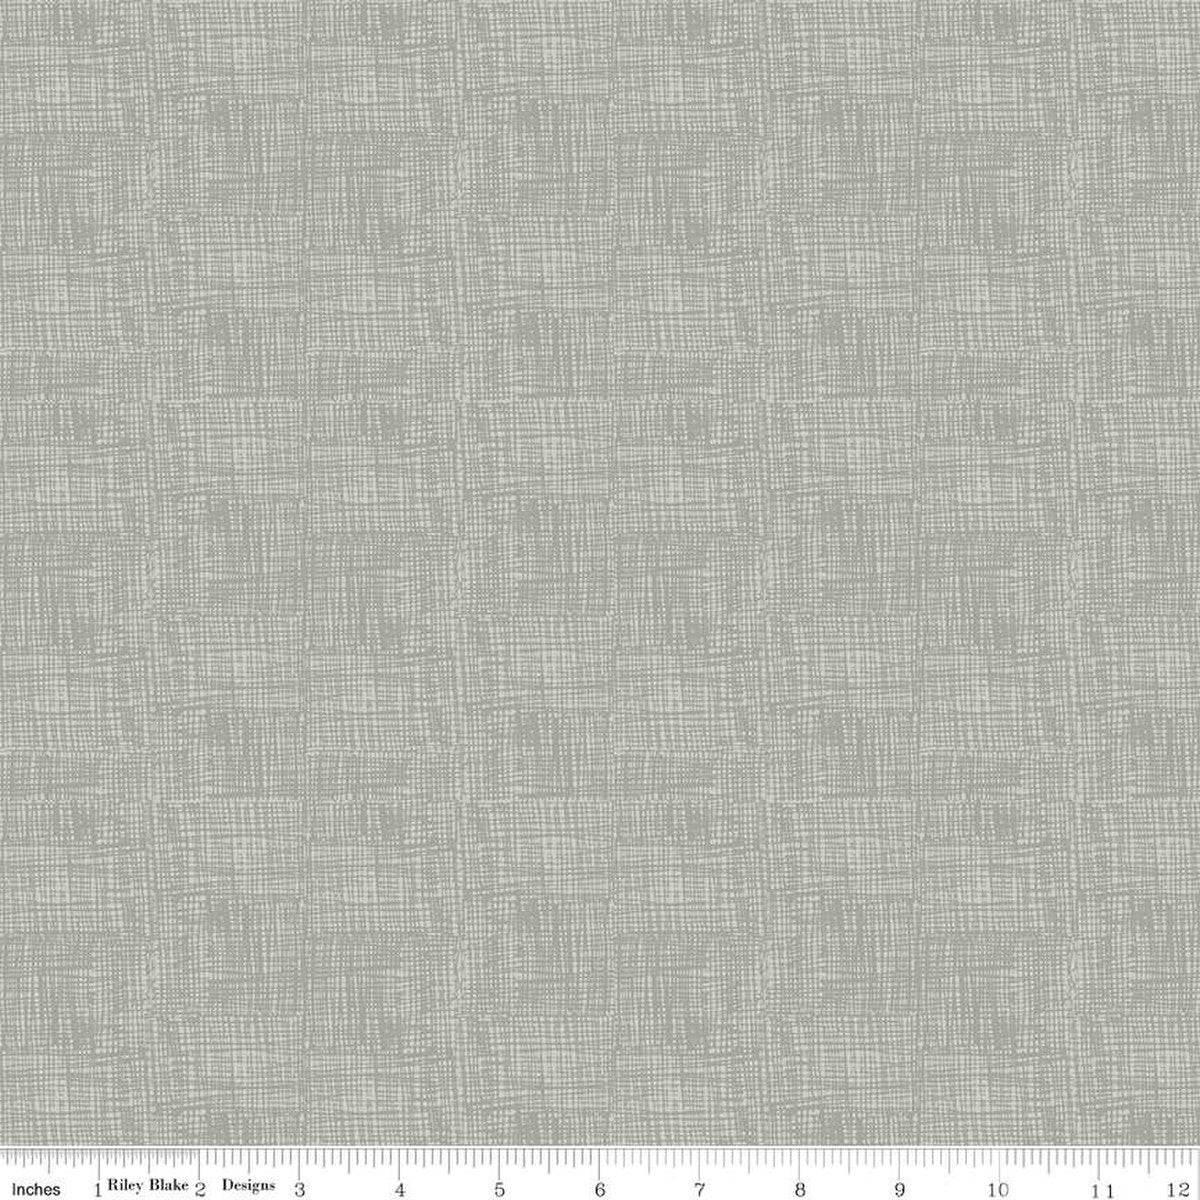 Nice Ice Baby Sketch Gray Designer Flannel by Riley Blake - Sold by the 1/4yd